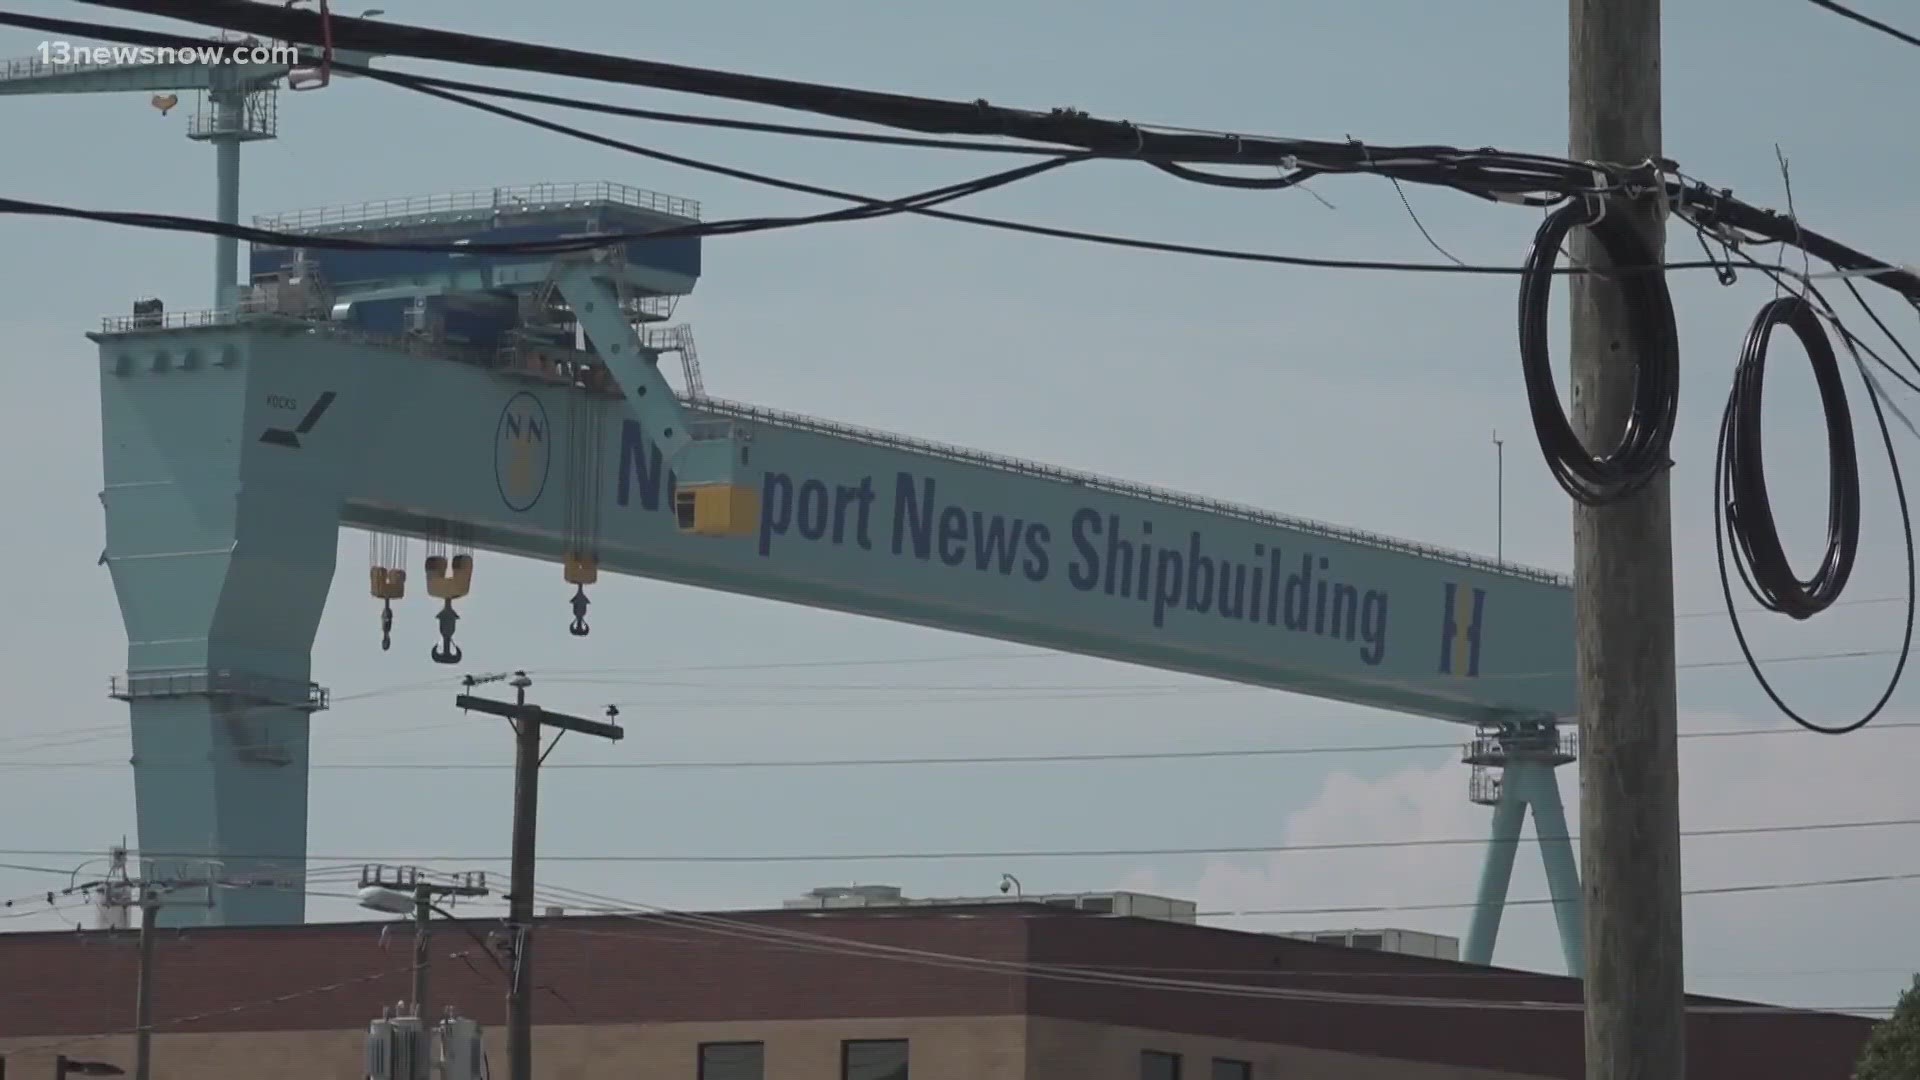 HII Newport News Shipbuilding outlines a number of steps it is pursuing, in the wake of four sailor deaths by suicide while their ship was under repair at the yard.